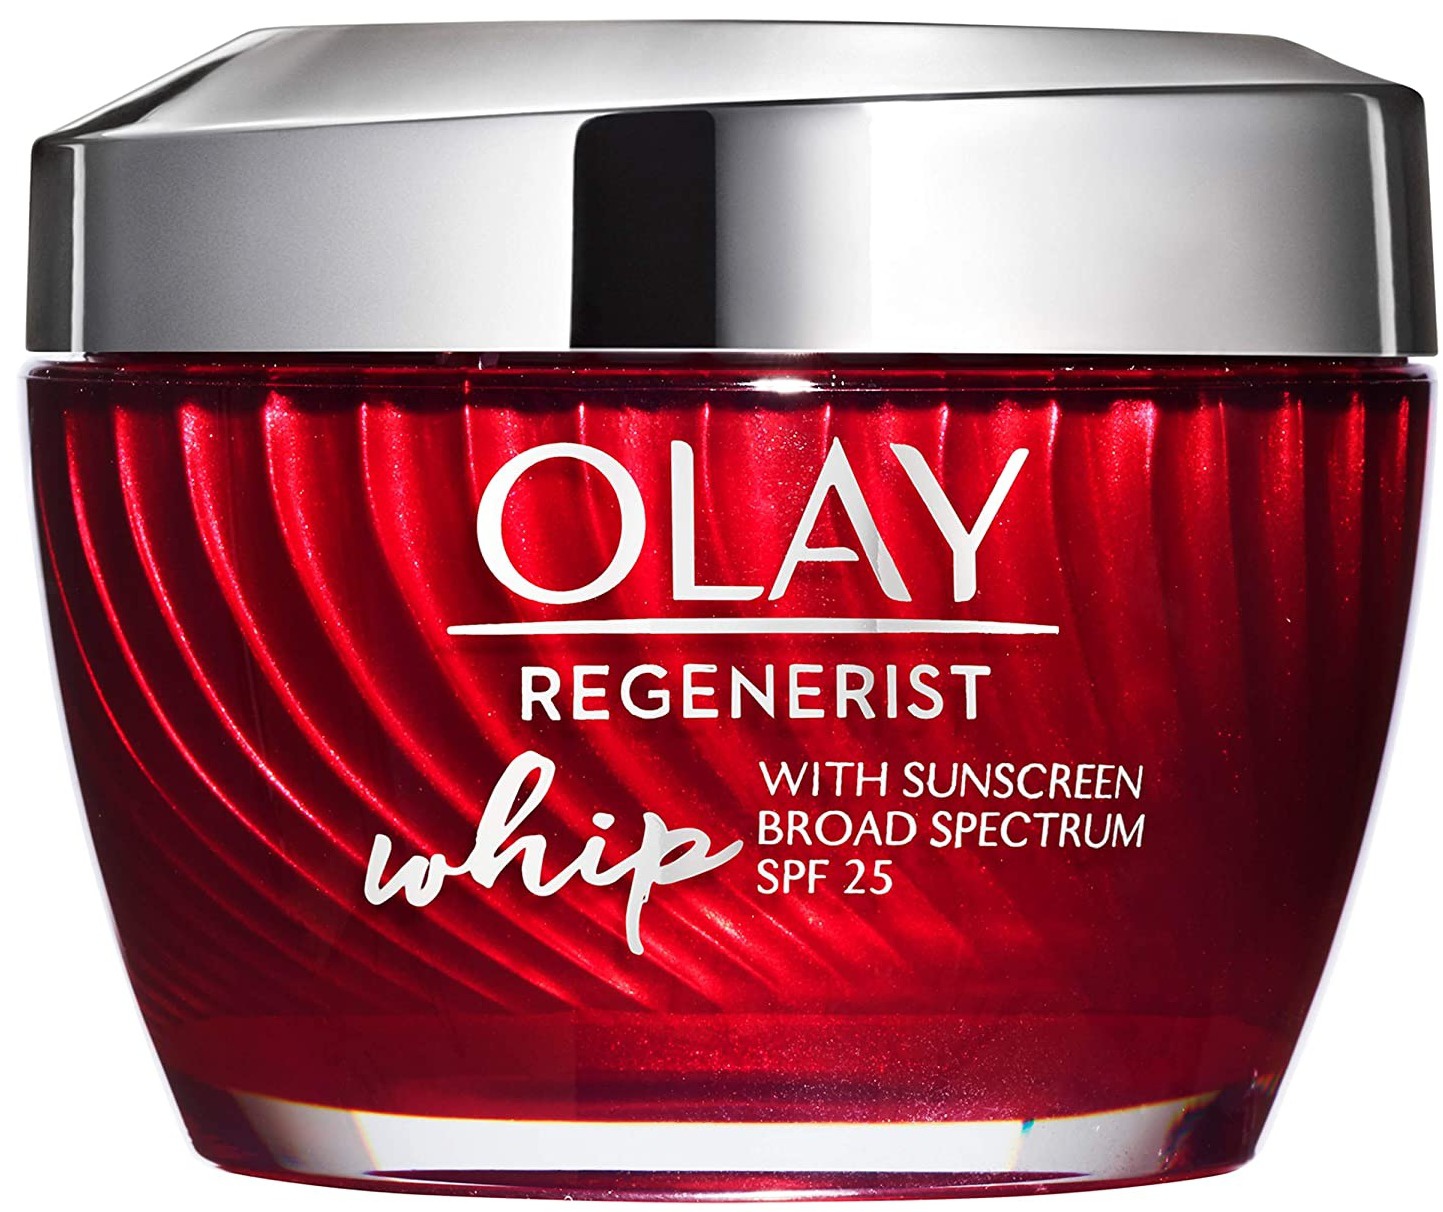 Olay Regenerist Whip With Sunscreen Broad Spectrum SPF 25